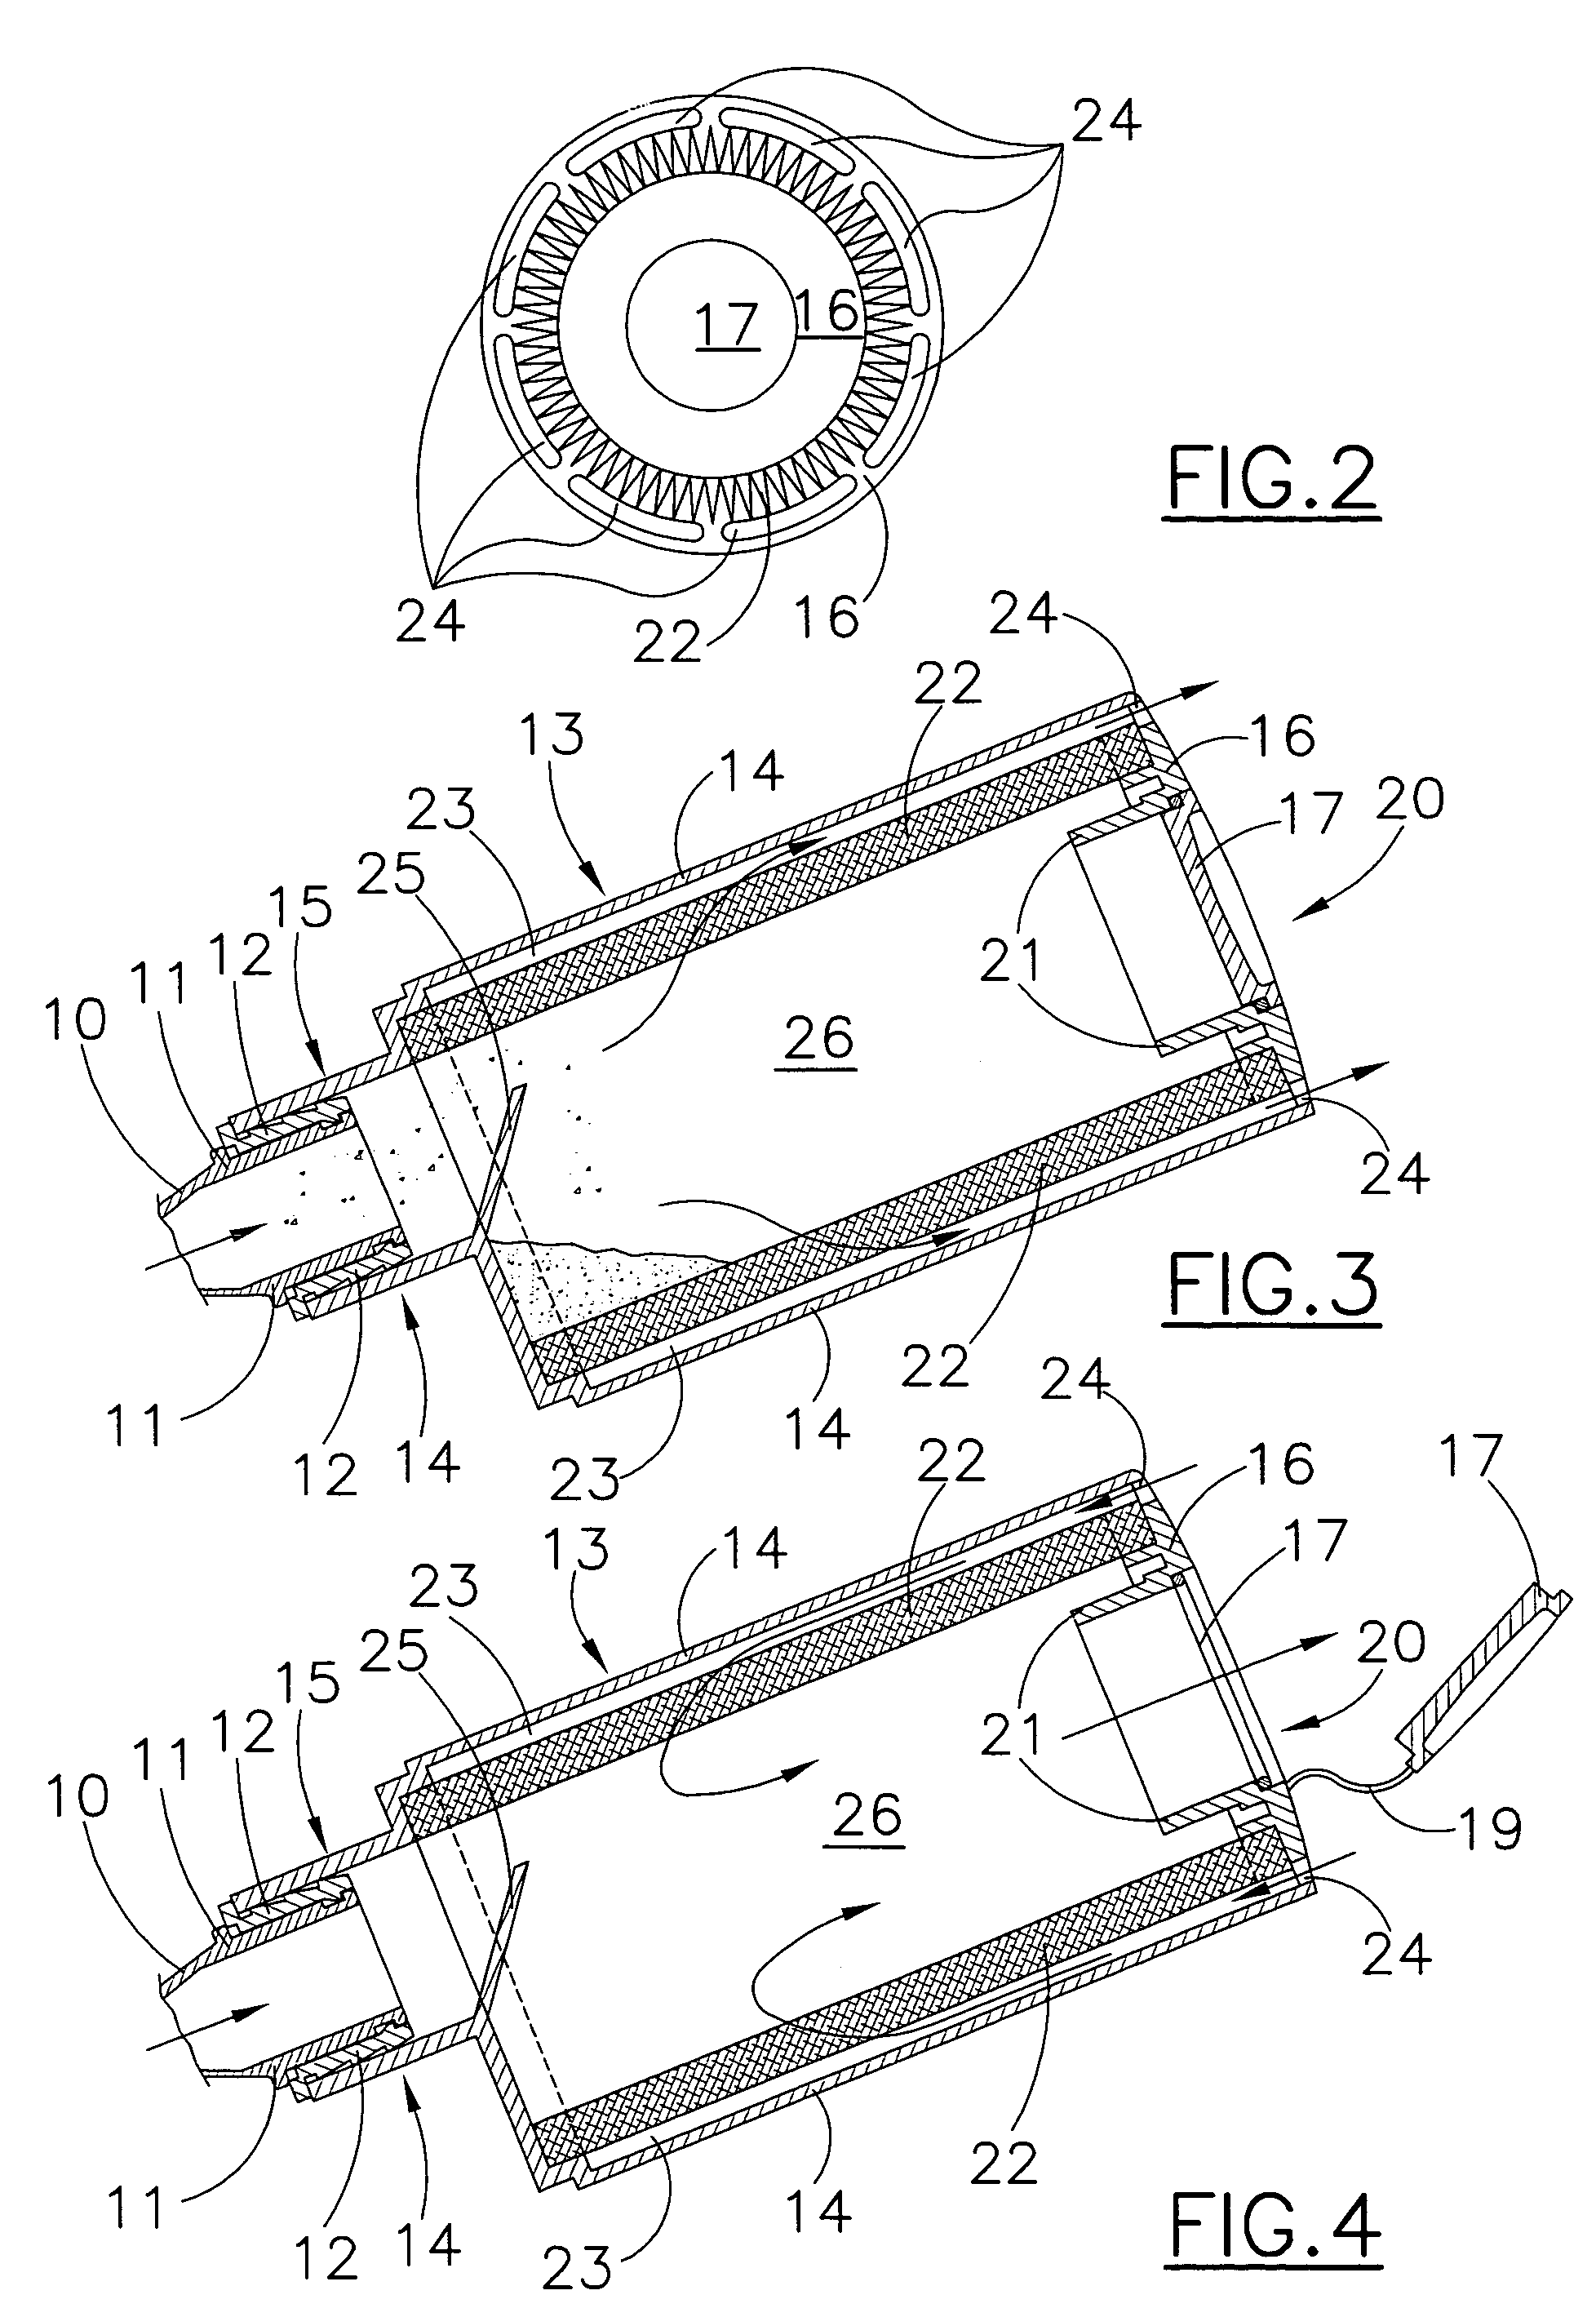 Motorized tool with suction and dust collection capacity